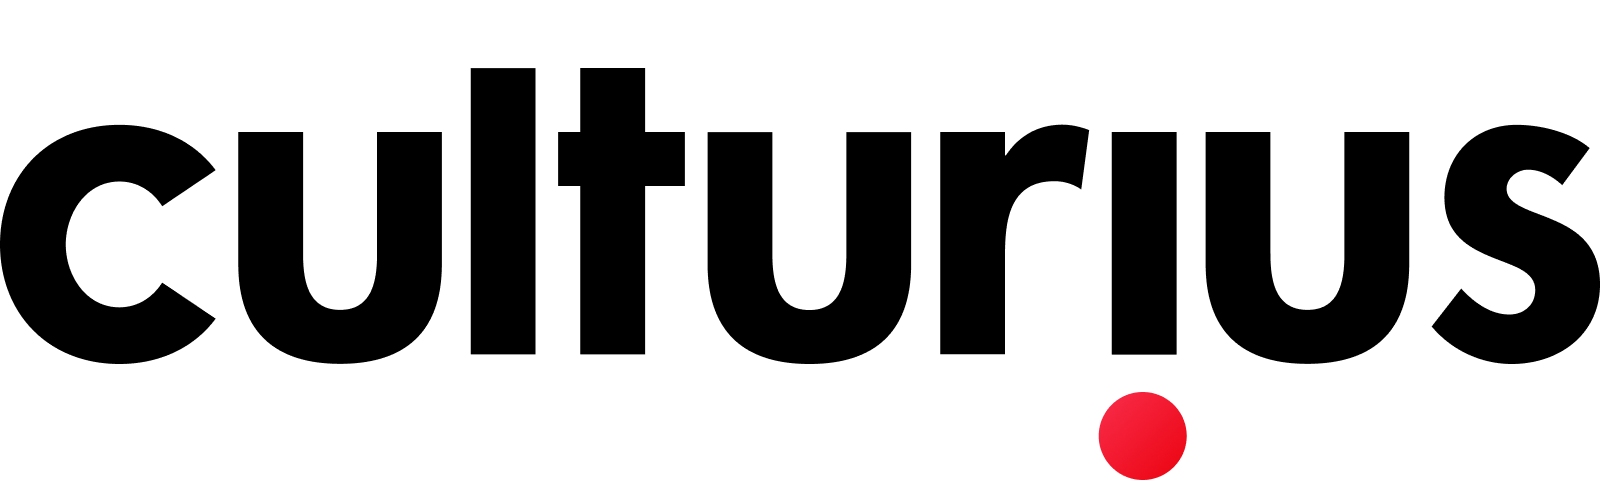 Culturius logo written in full black and a large red dot inverted of the i downwards